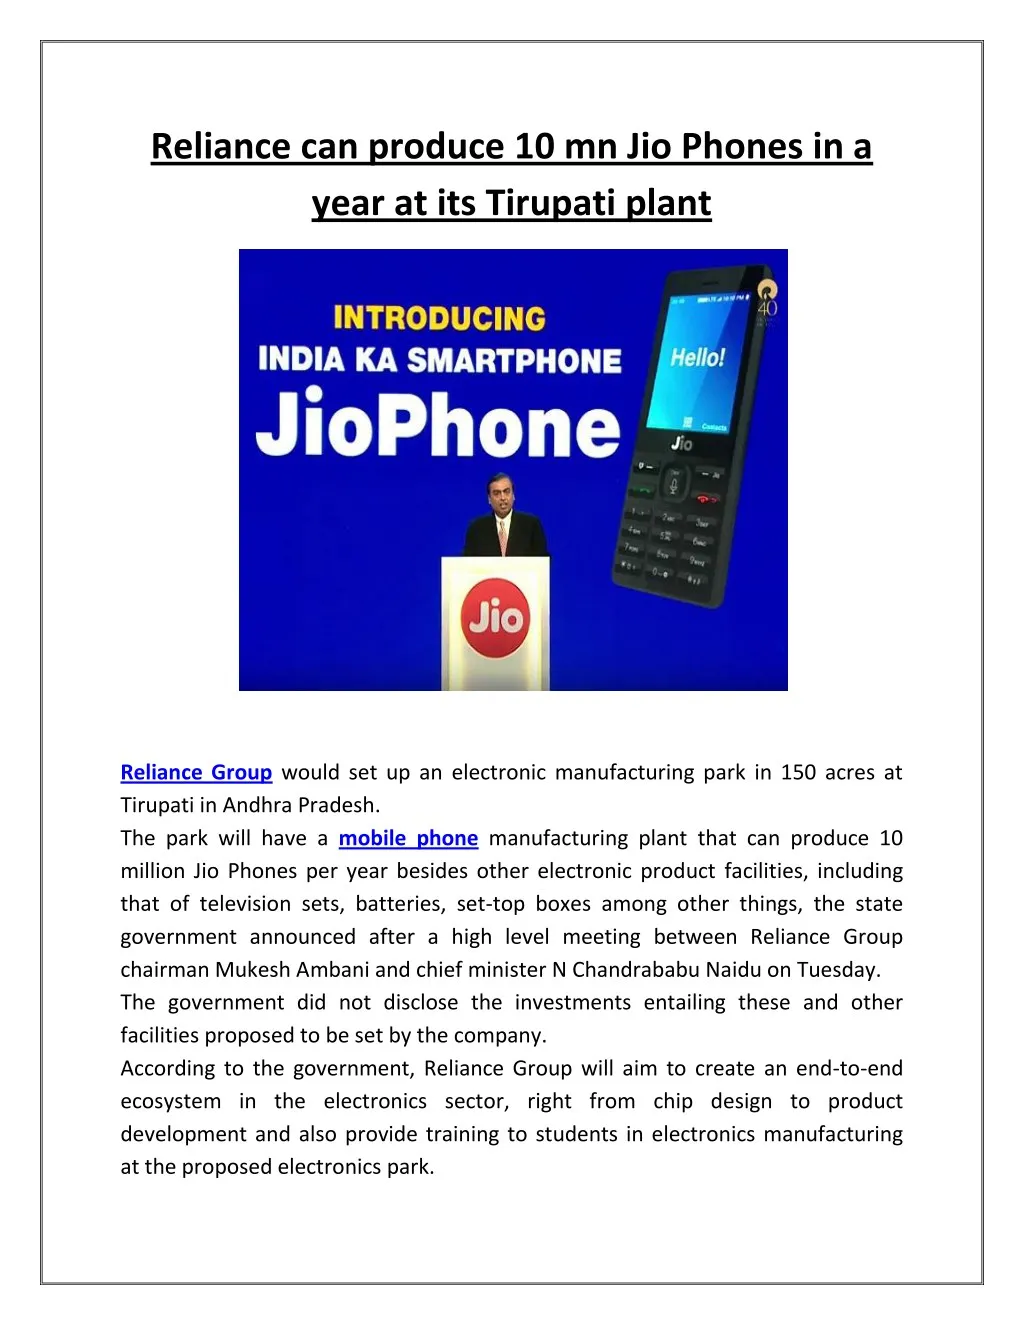 reliance can produce 10 mn jio phones in a year